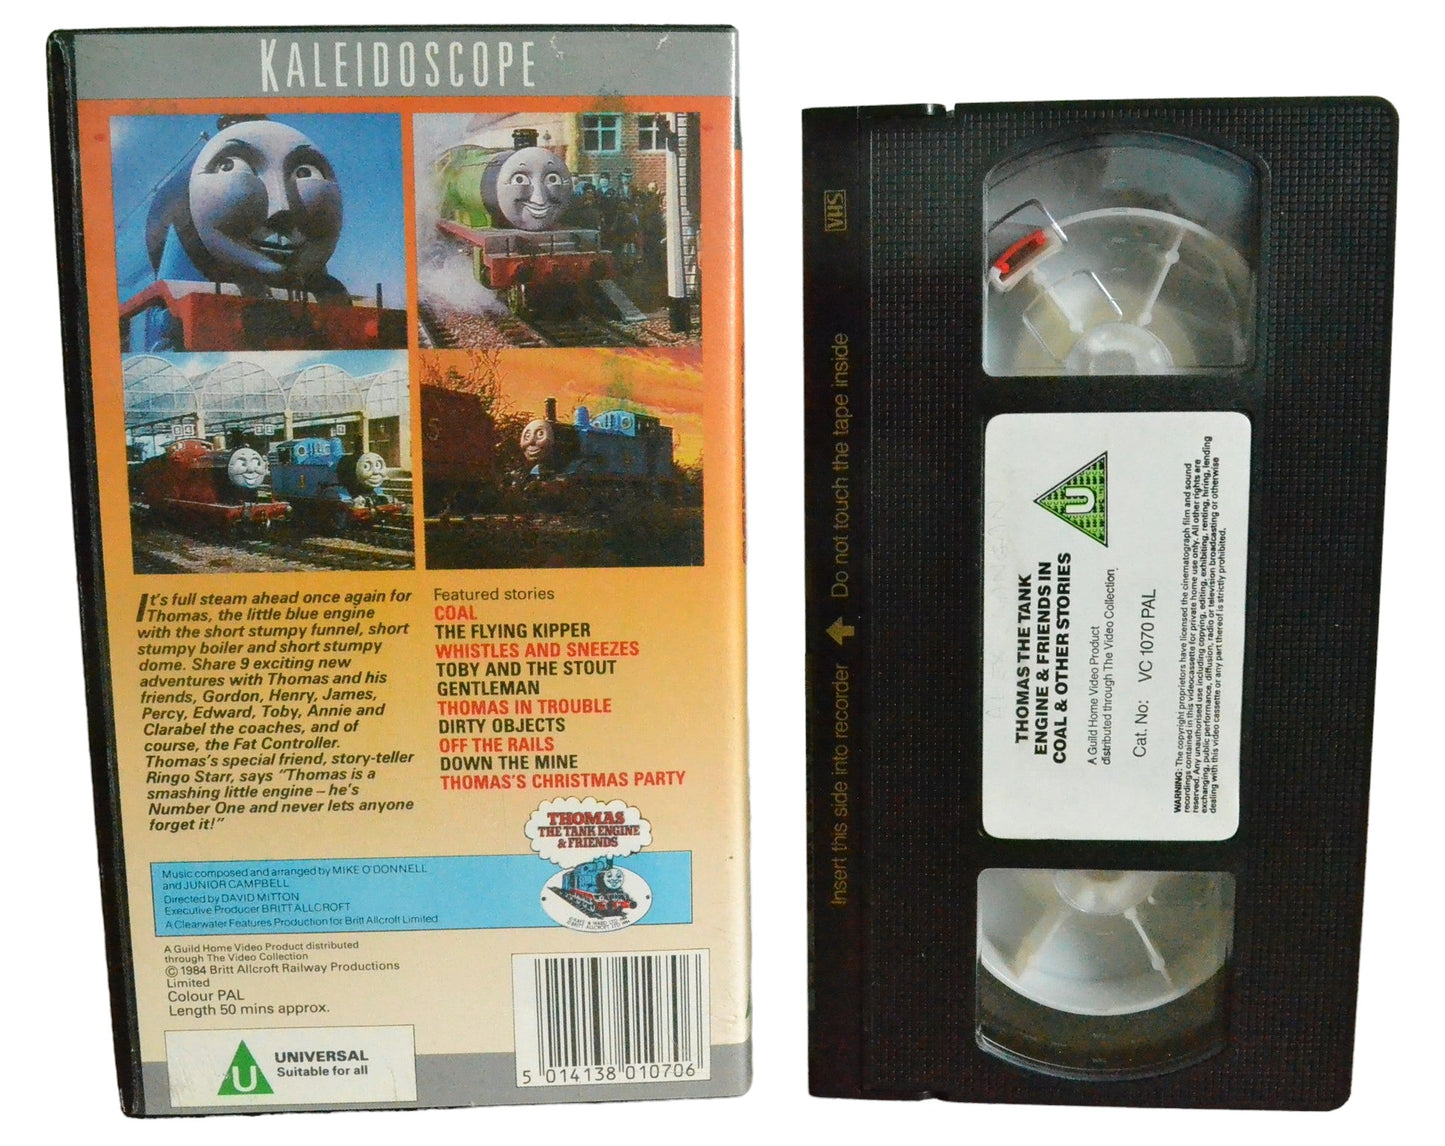 Thomas The Tank Engine & Friends : In Coal and Other Stories - The Video Collection - VC1070 - Children - Pal - VHS-